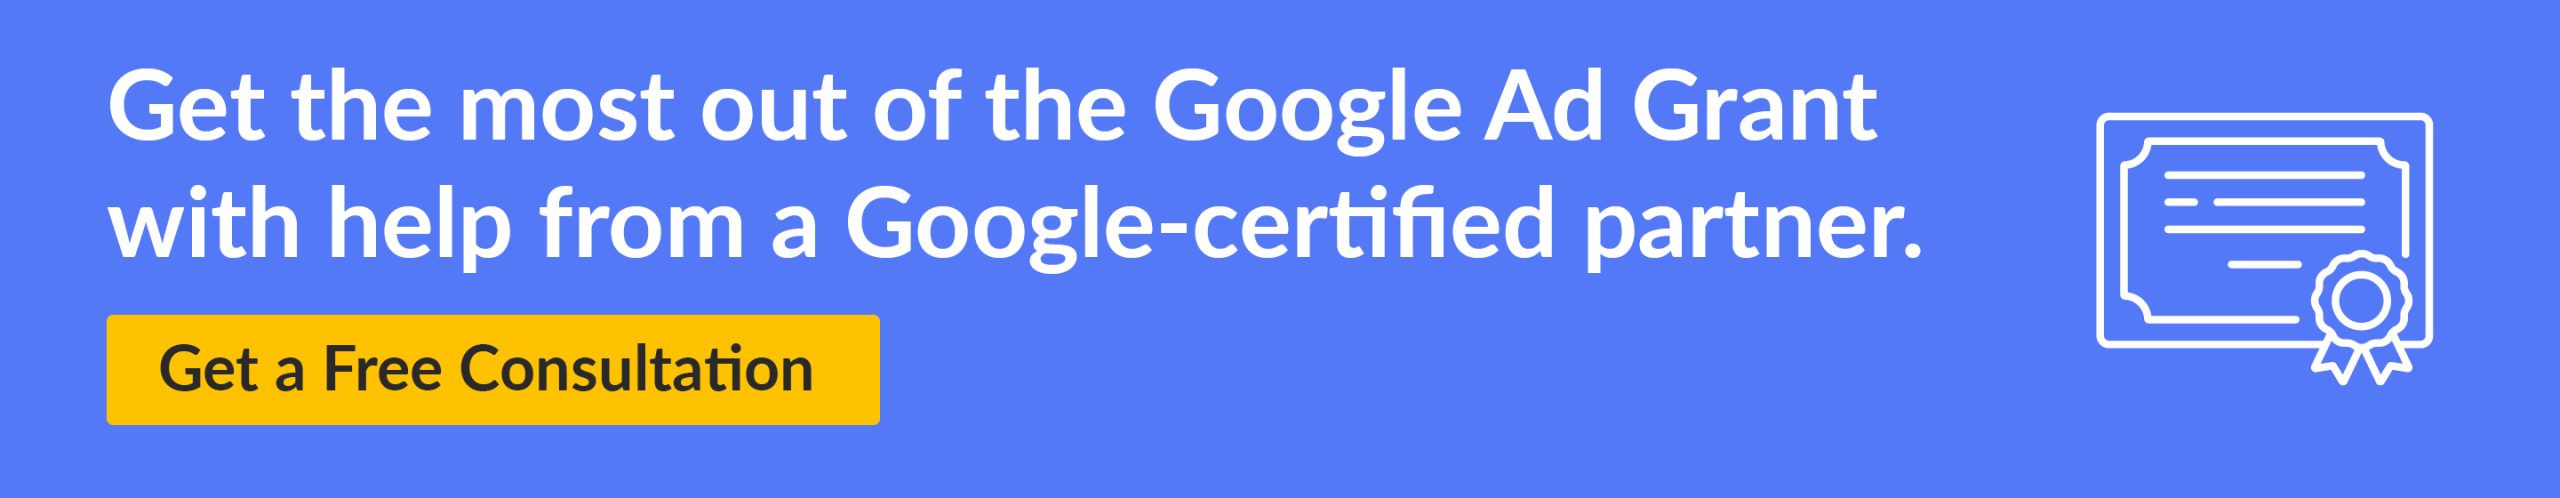 Get the most out of the Google Ad Grant with help from a Google-certified partner. Get a free consultation. 